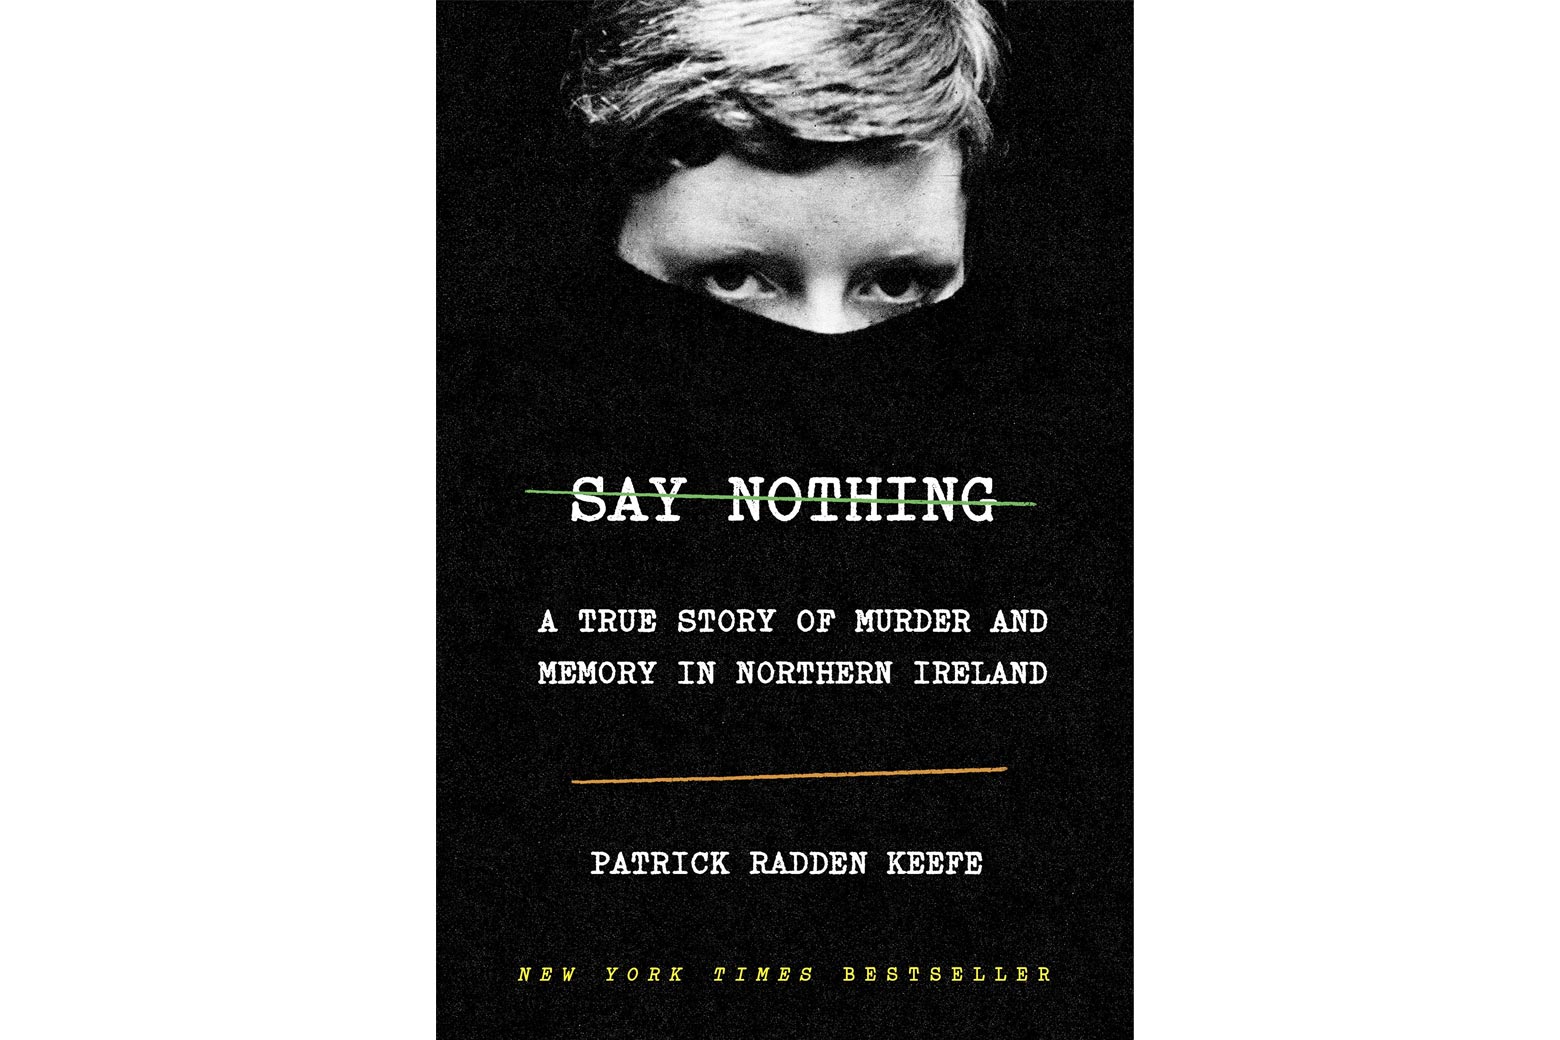 Say Nothing book cover.